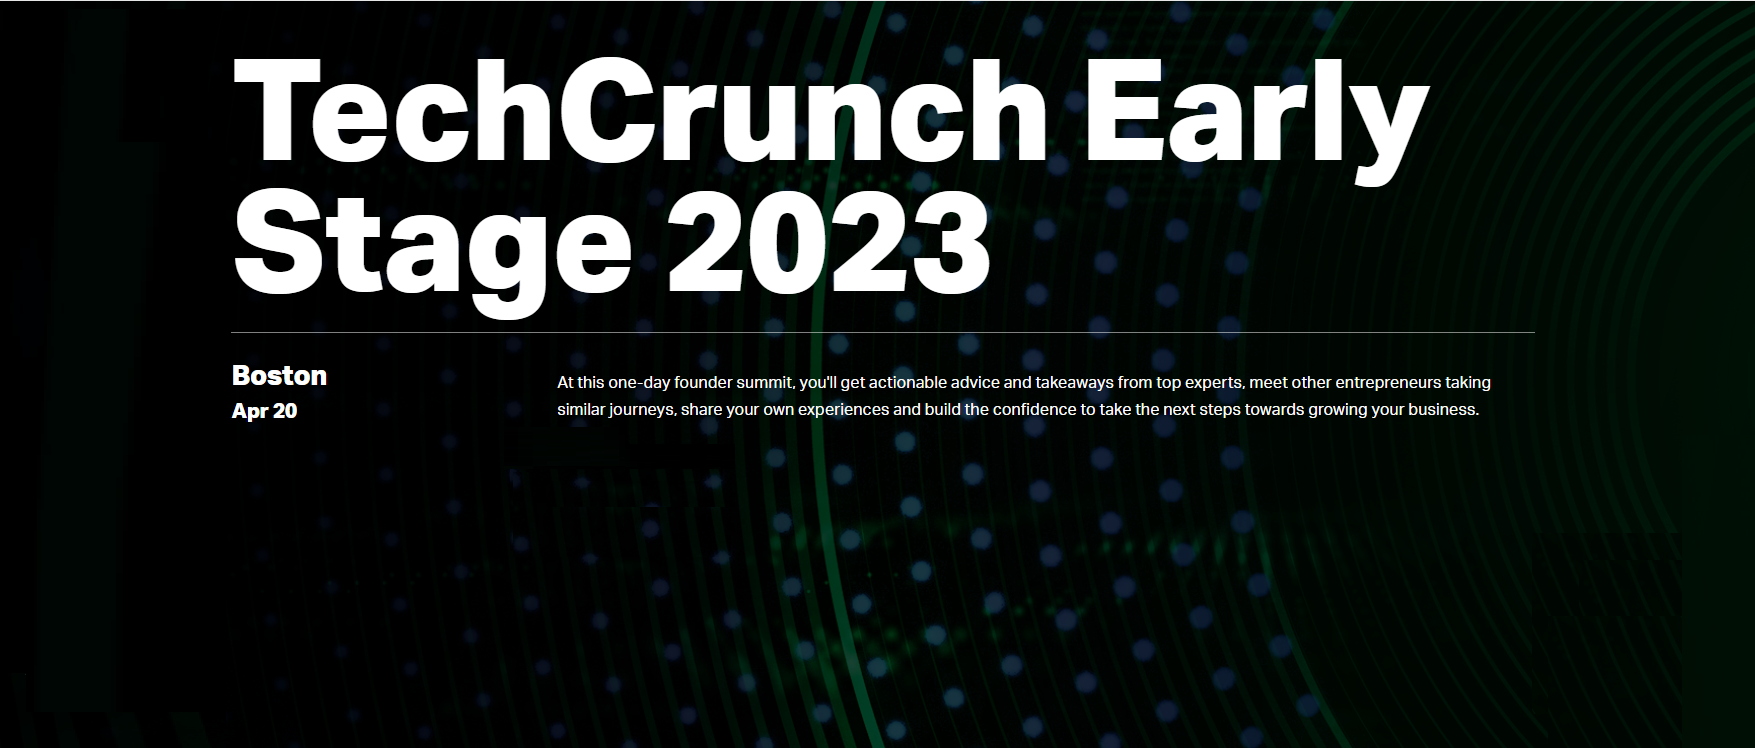 TechCrunch Early Stage 2023